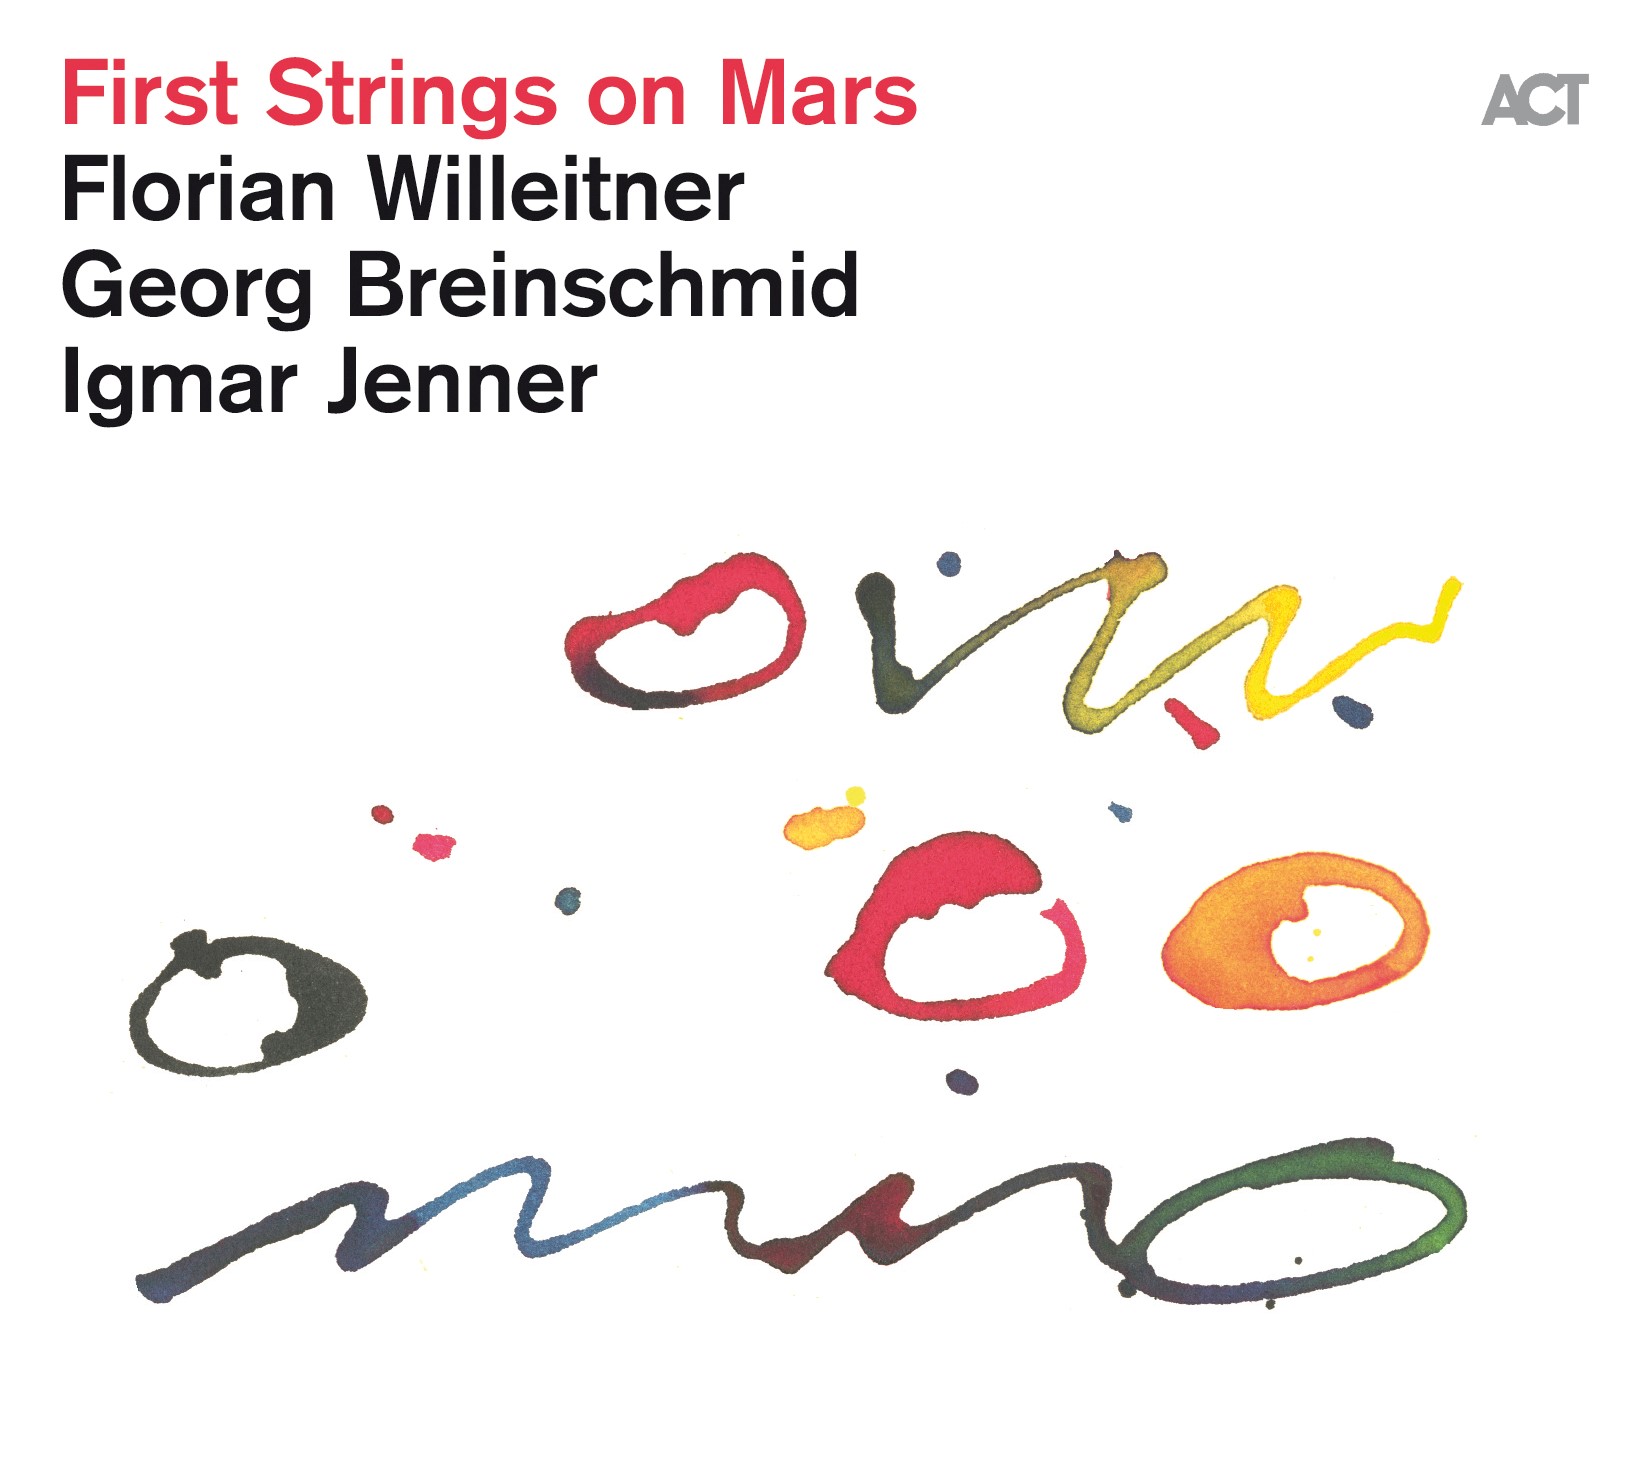 First Strings on Mars